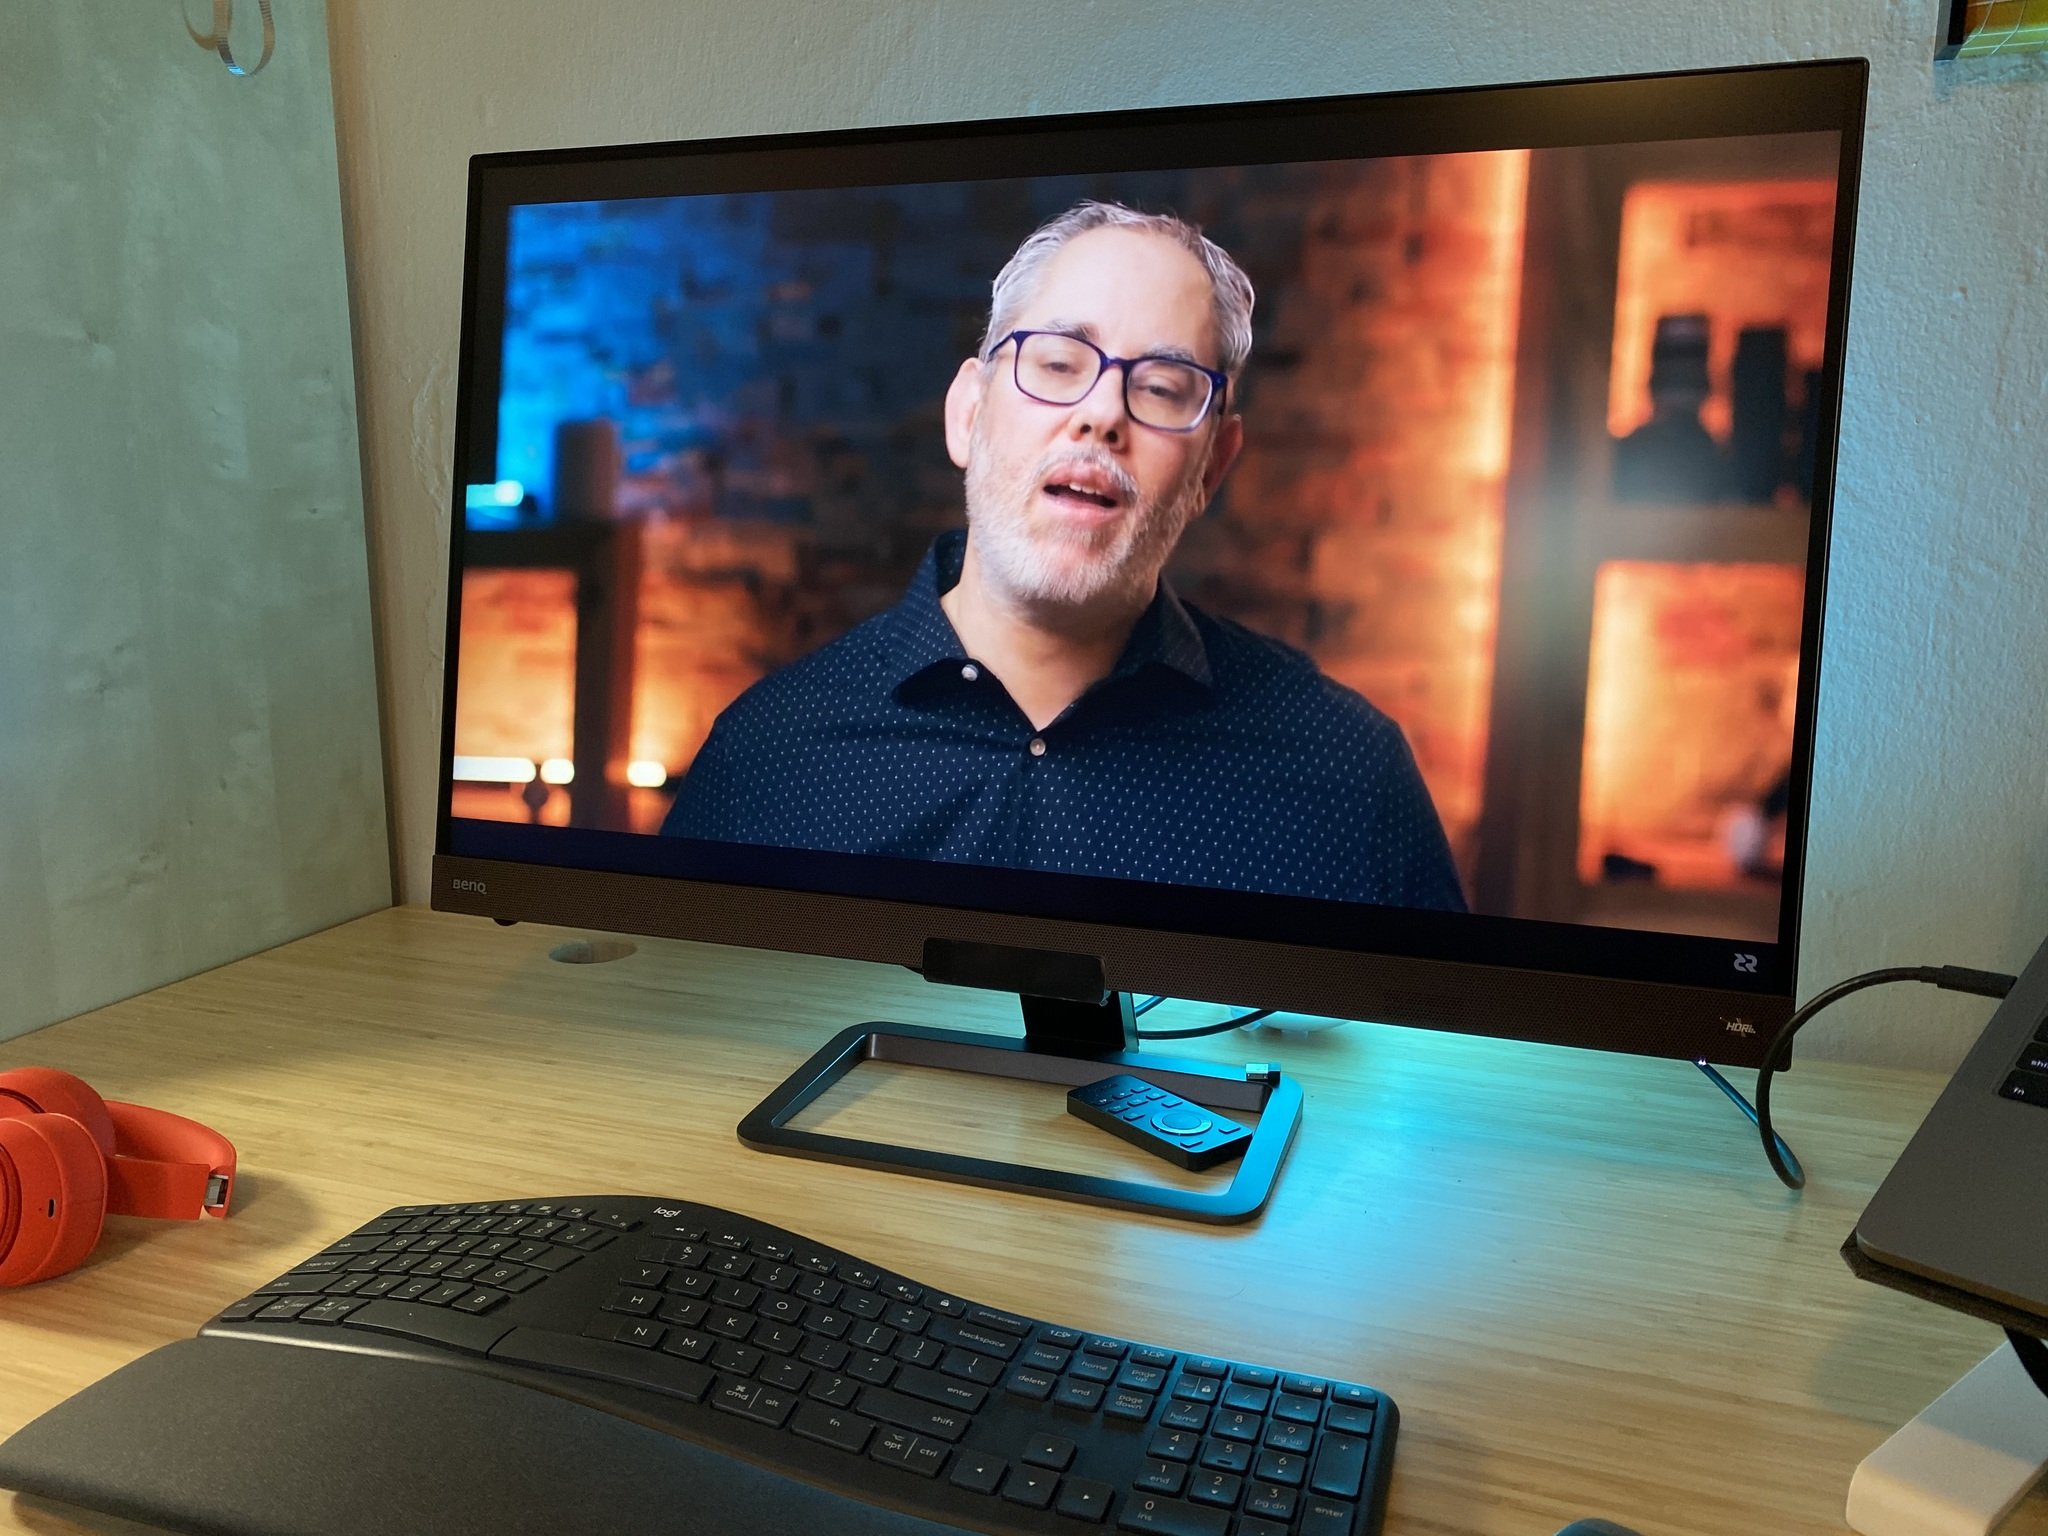 BenQ EW3280U entertainment monitor review: Movie-watching on your